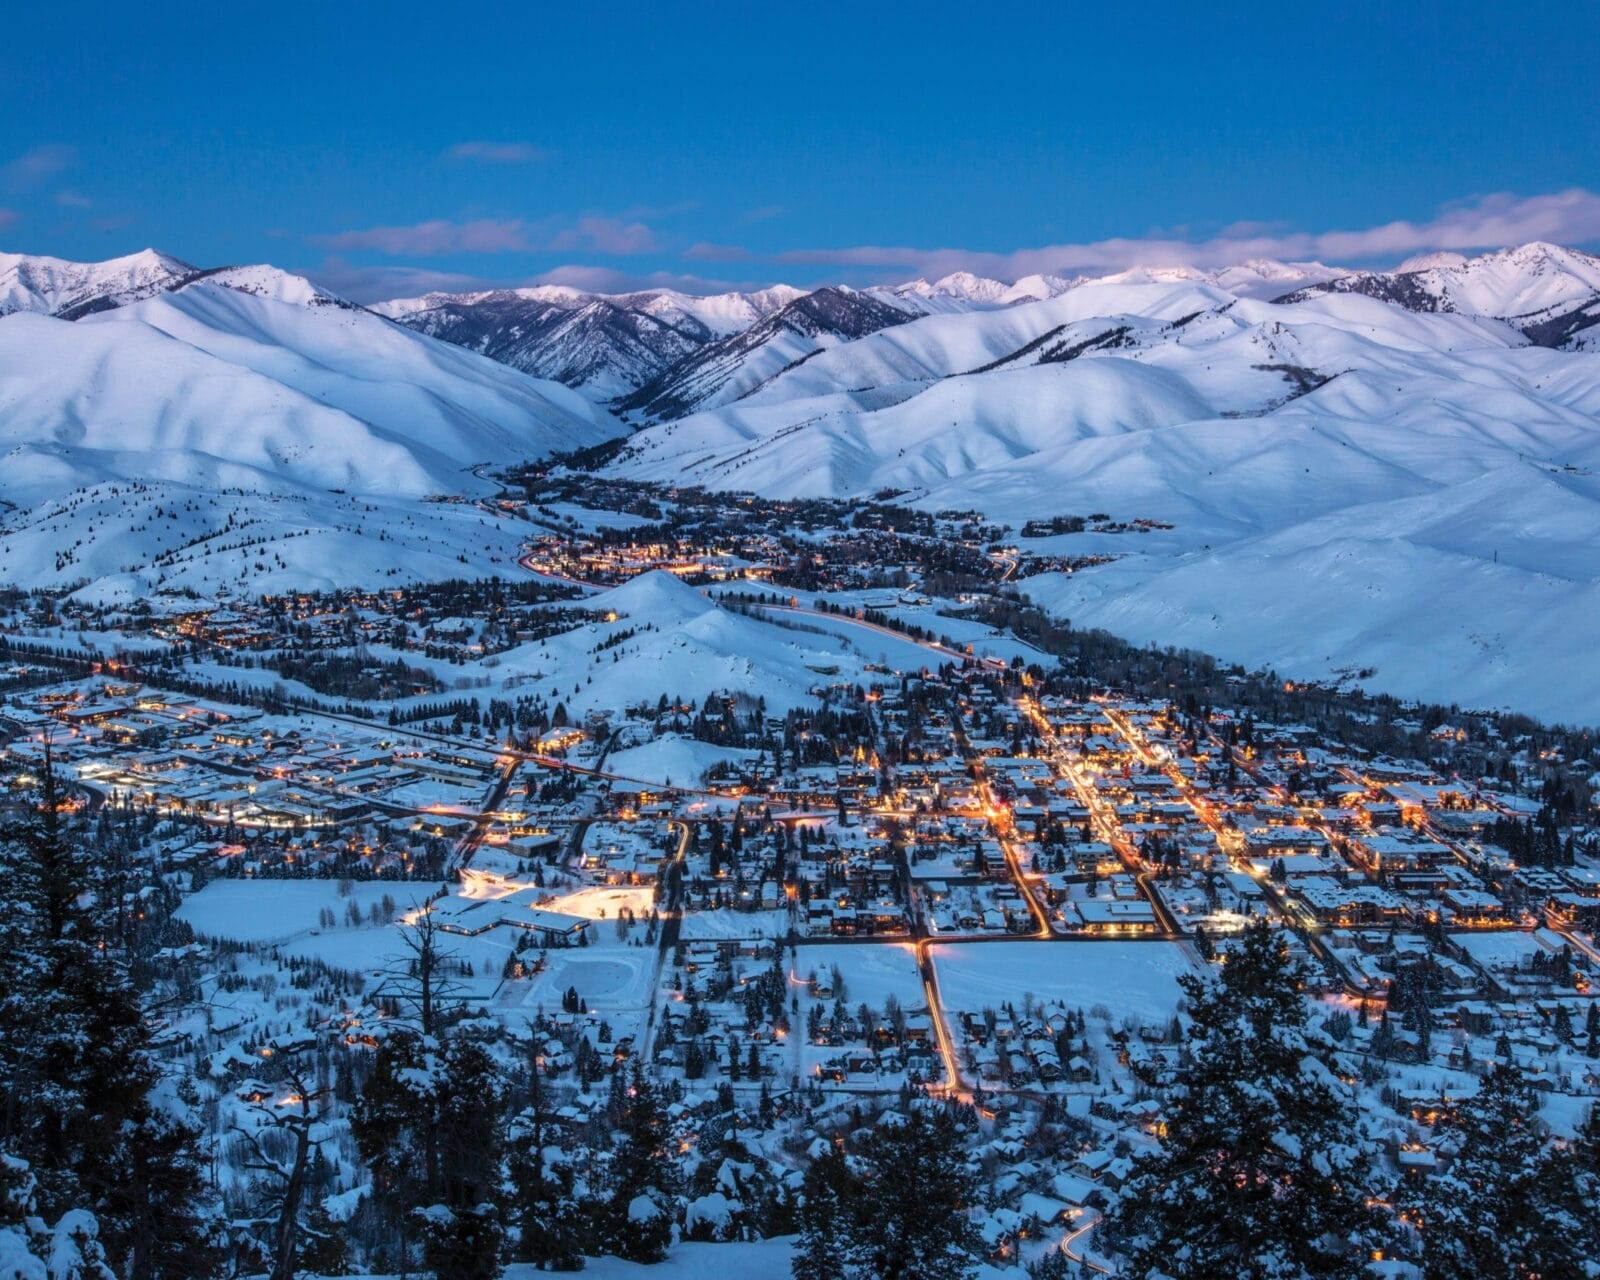 Aerial view of a snow-covered mountain town illuminated at dusk, with surrounding peaks under a twilight sky. For more information, contact us.